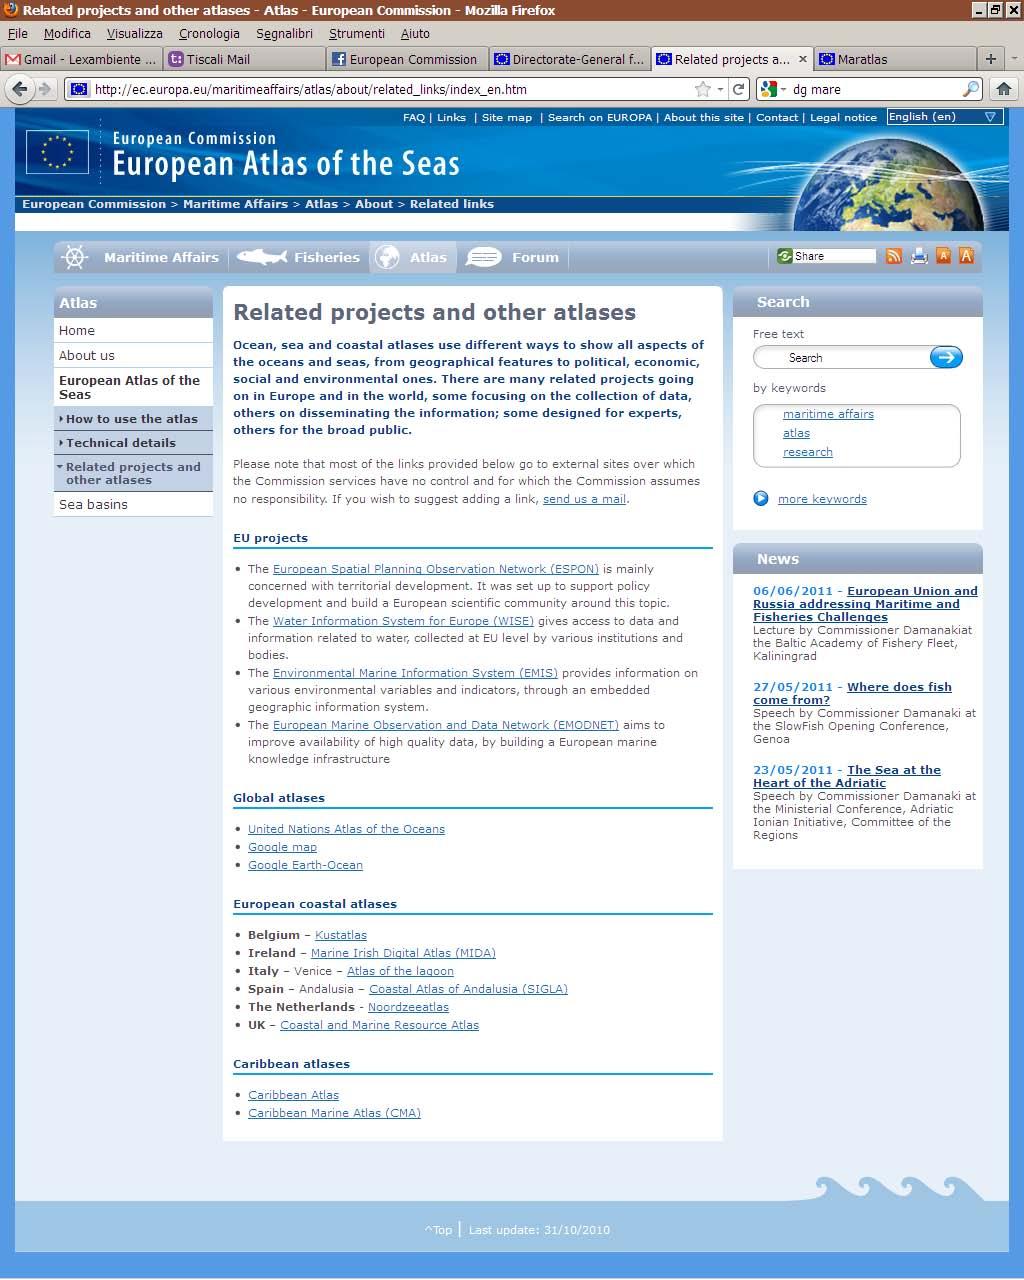 ICAN 4 effect The Atlas of the lagoon has been mentioned among